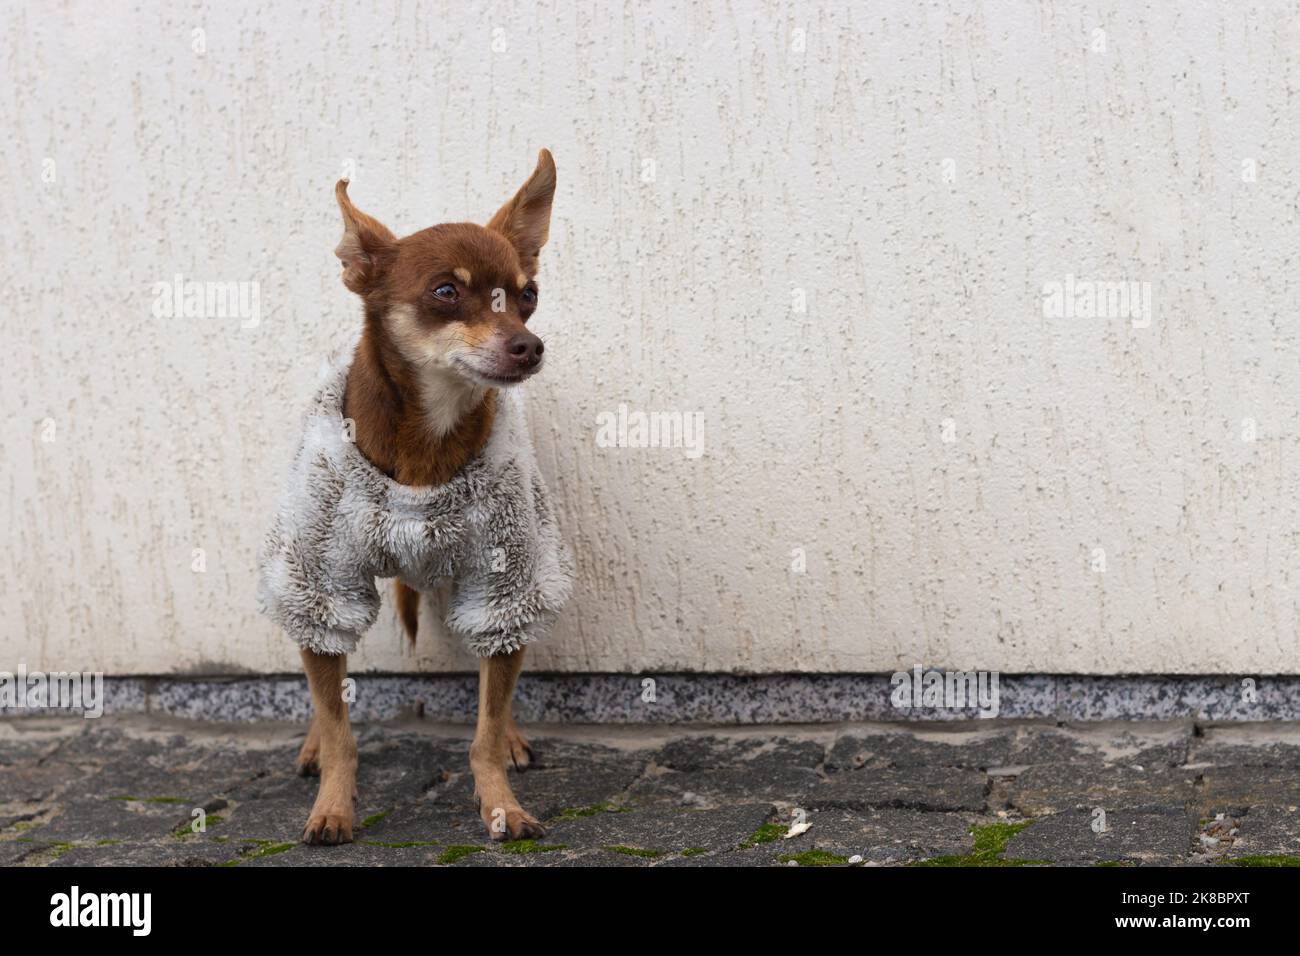 Small dog in winter clothes. Companion dog on the street. Pet fashion. Funny little dog standing alone. Dog clothes in cold weather. Miniature puppy. Stock Photo